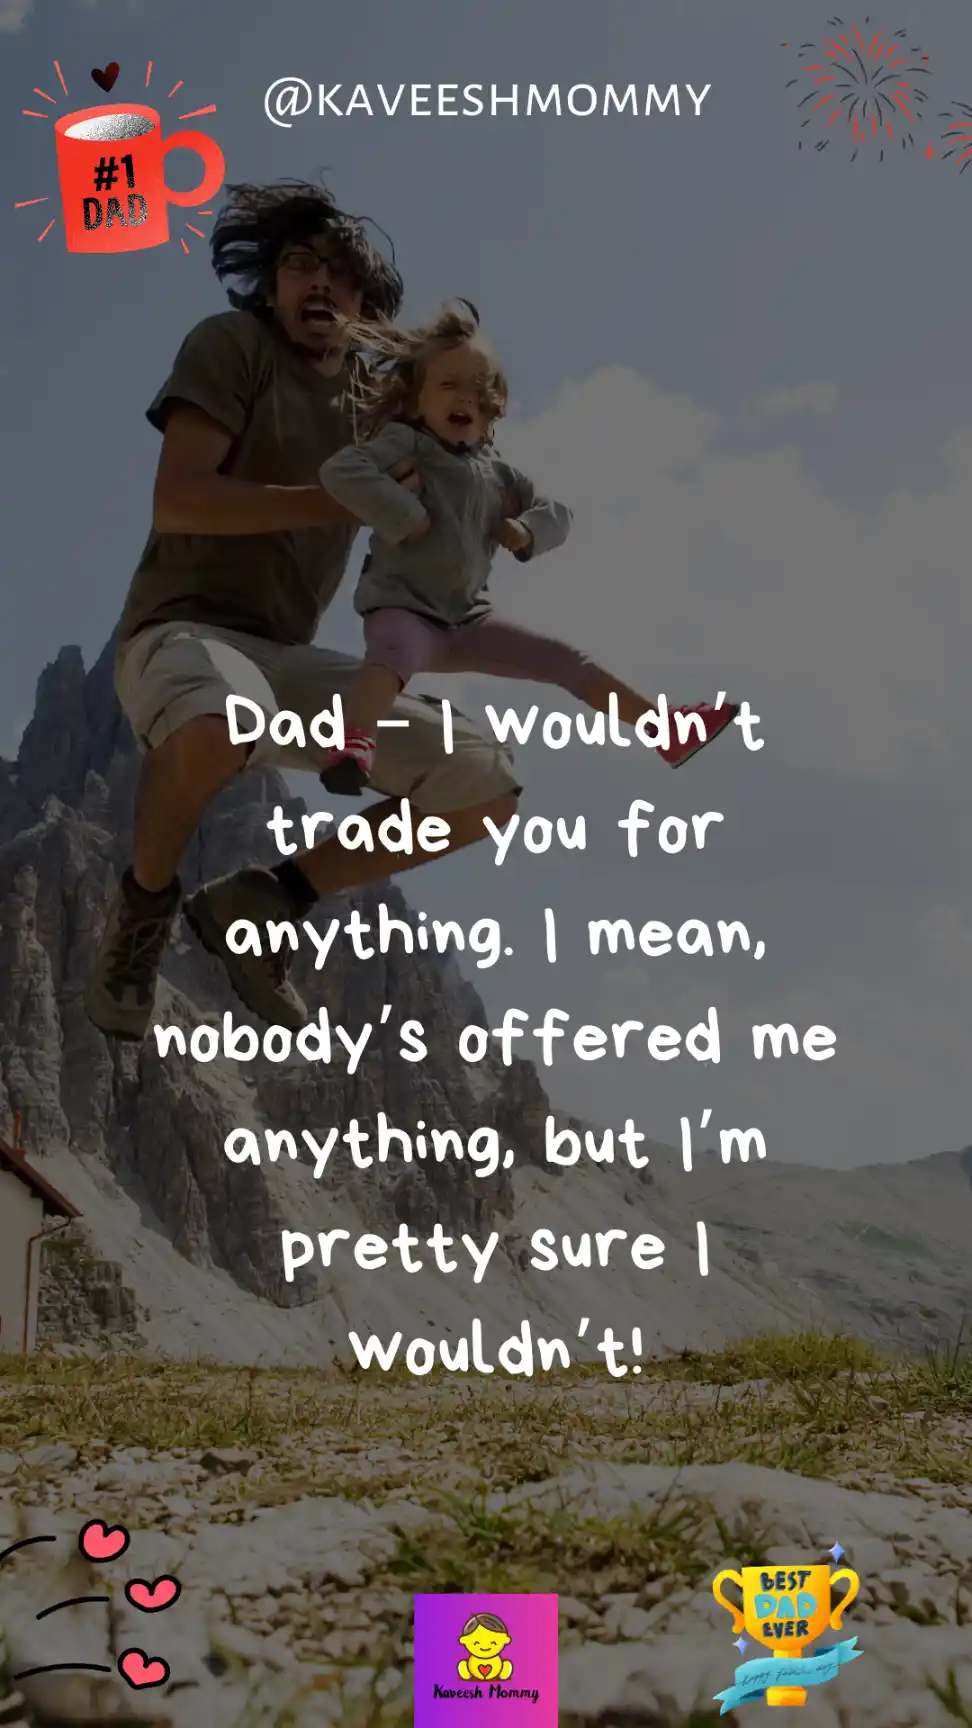 father daughter sayings-Dad – I wouldn’t trade you for anything. I mean, nobody’s offered me anything, but I’m pretty sure I wouldn’t!